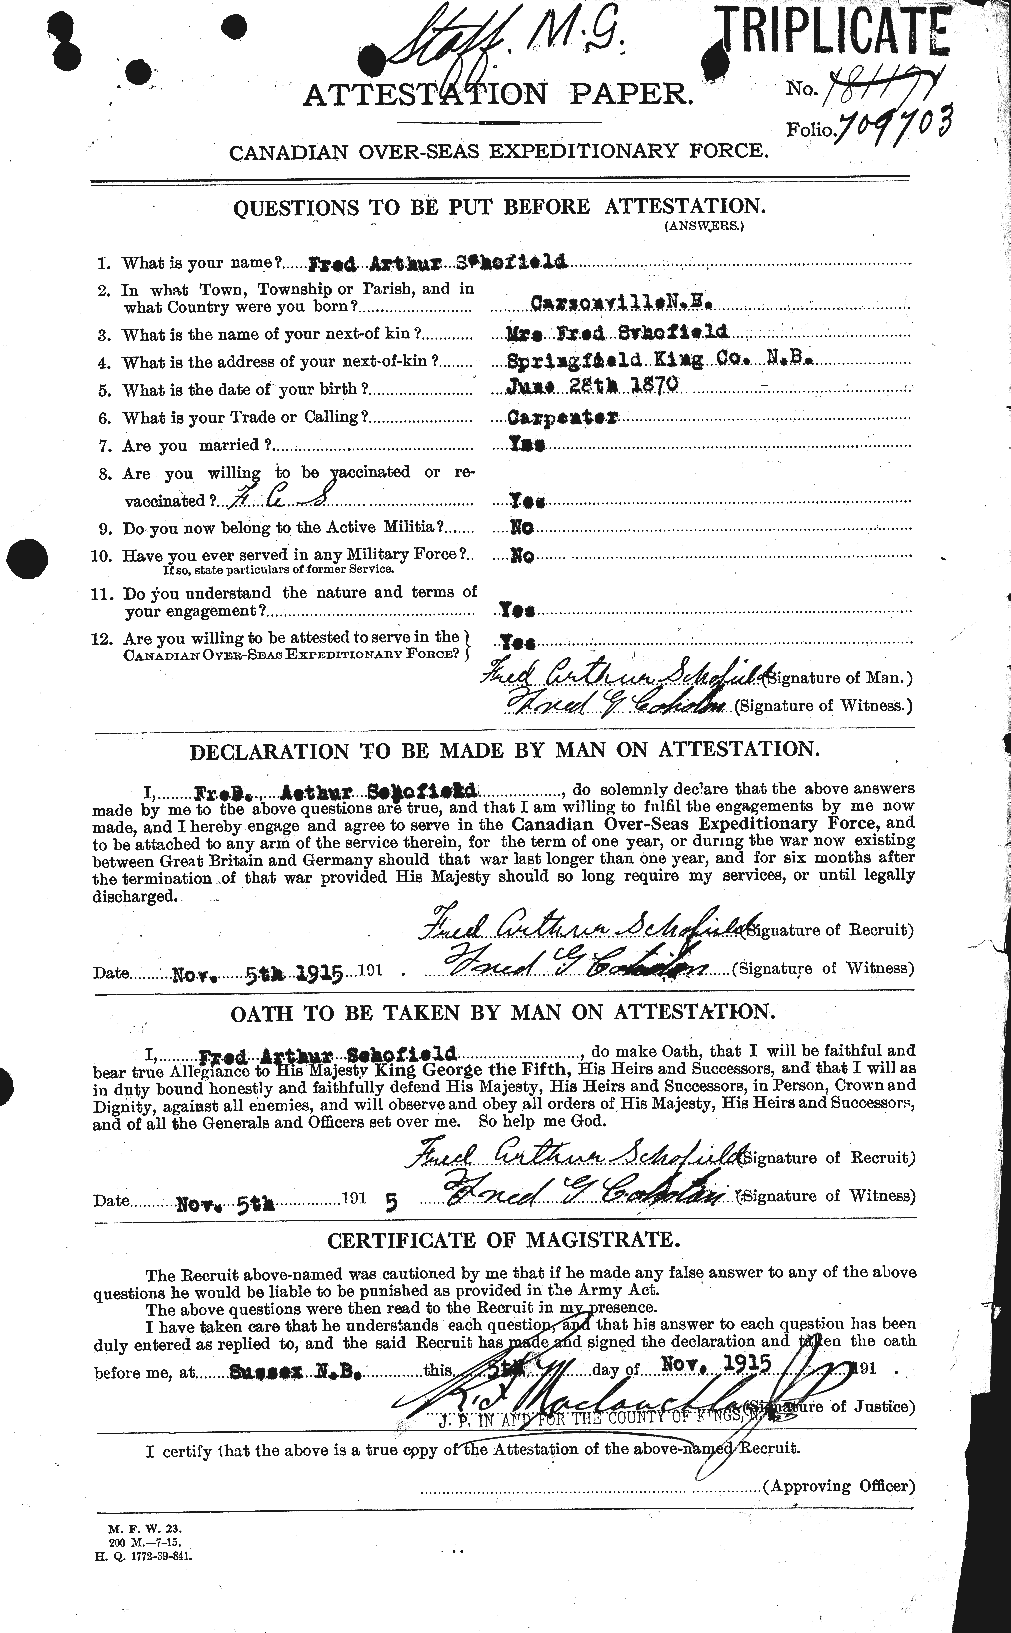 Personnel Records of the First World War - CEF 082200a